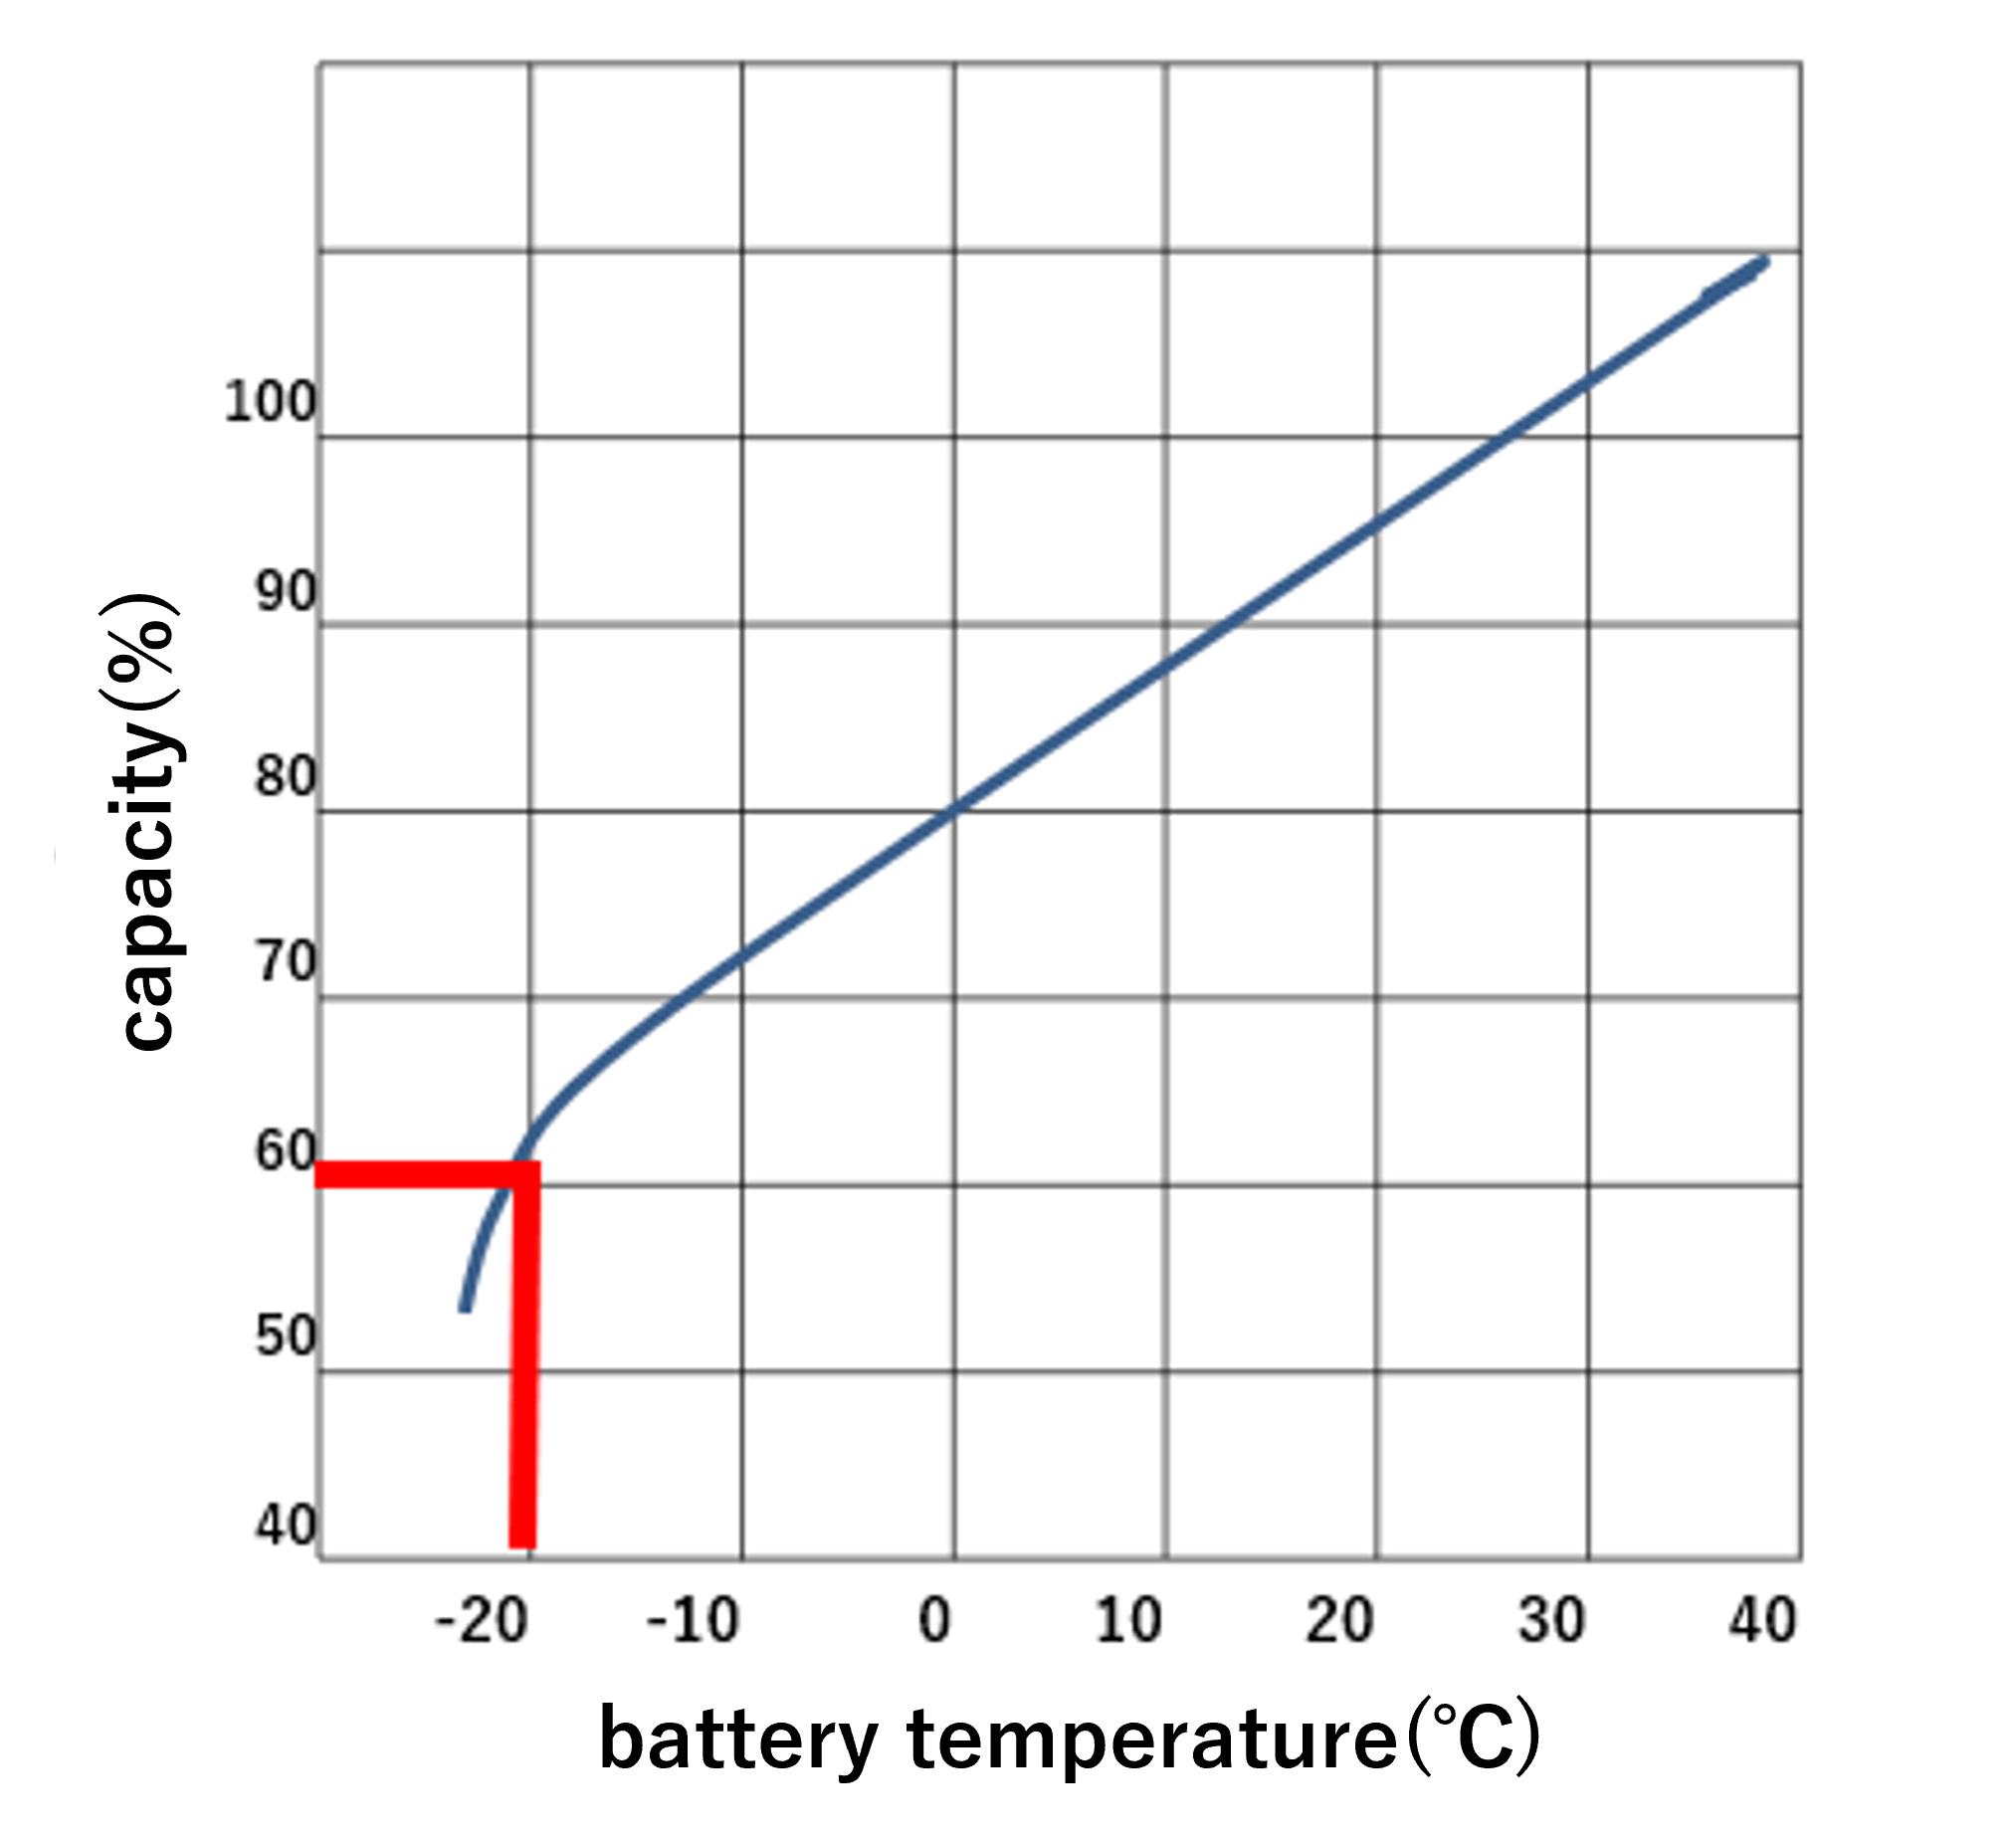 Lithium-ion battery and temperature